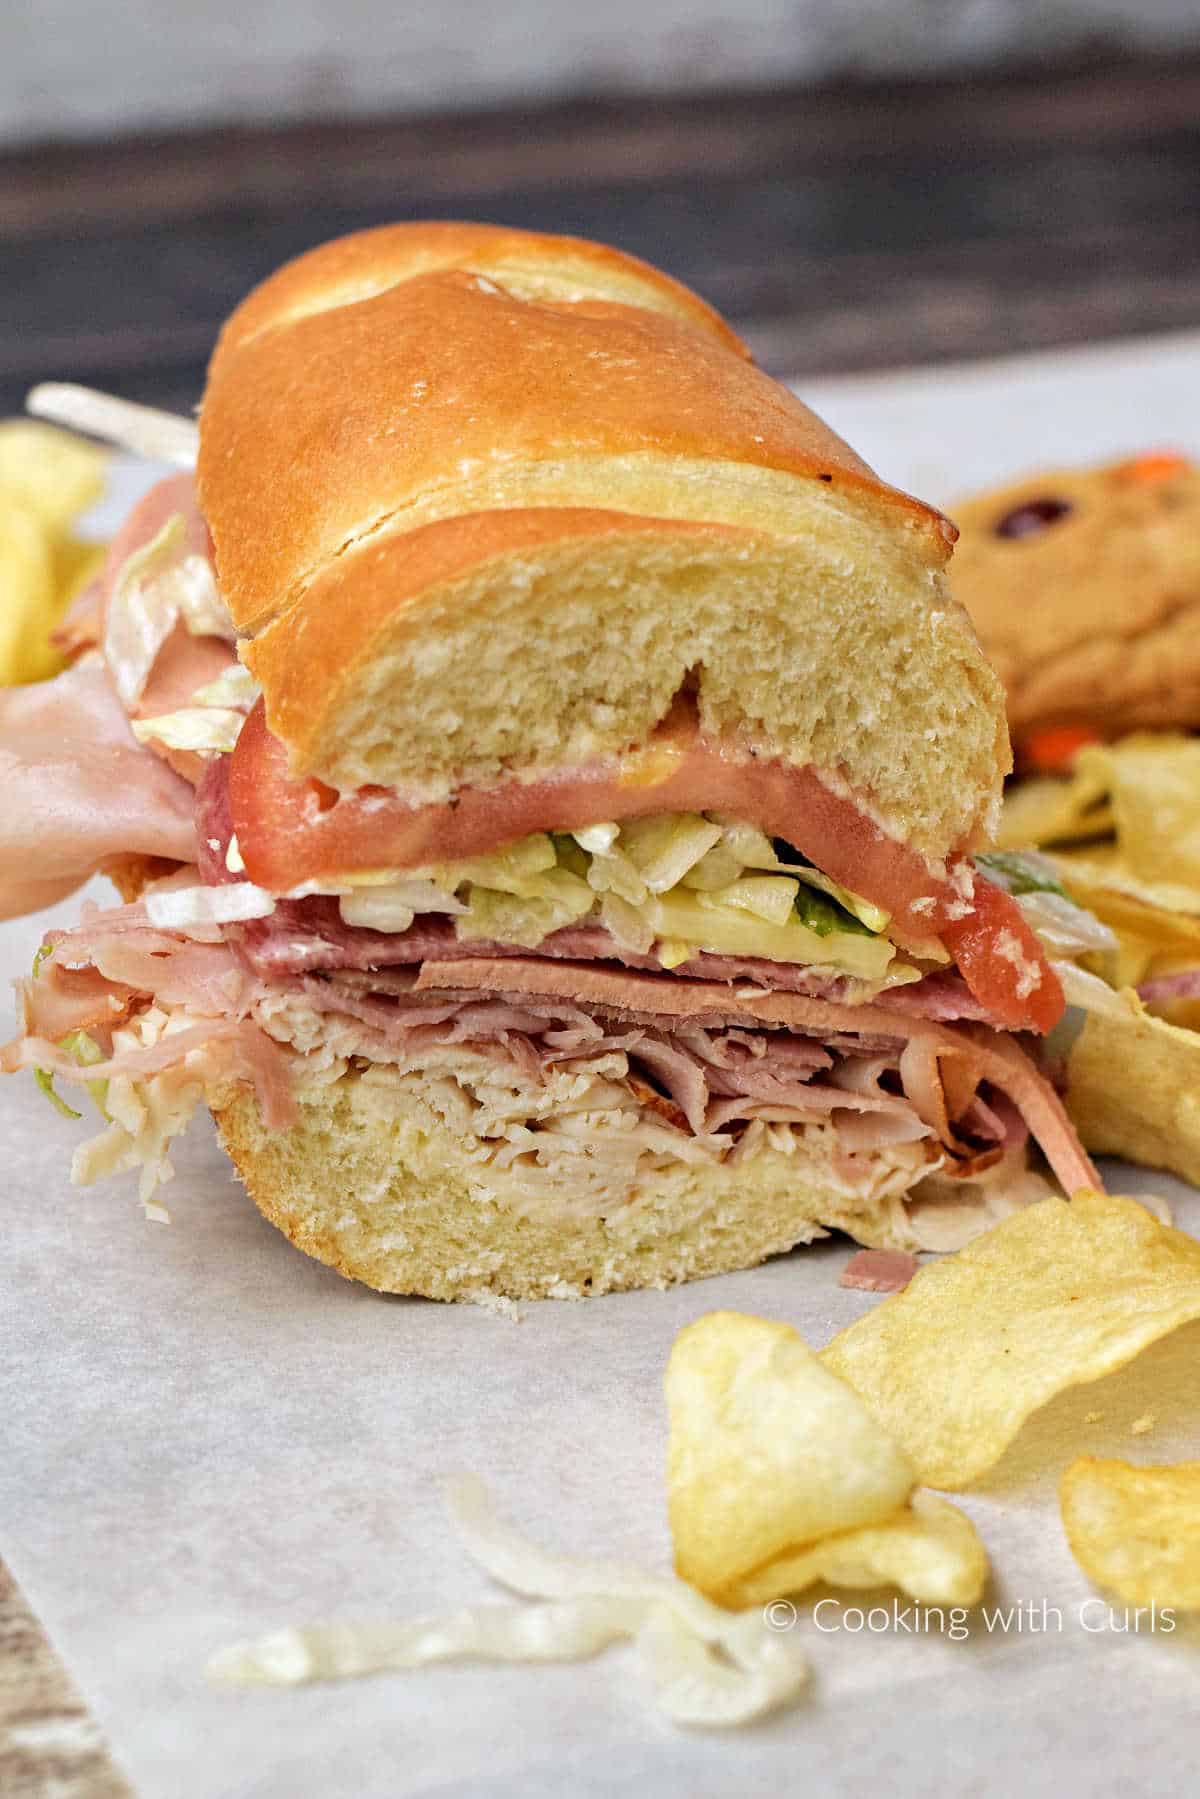 Half of a classic Italian sub sandwich surrounded by potato chips.